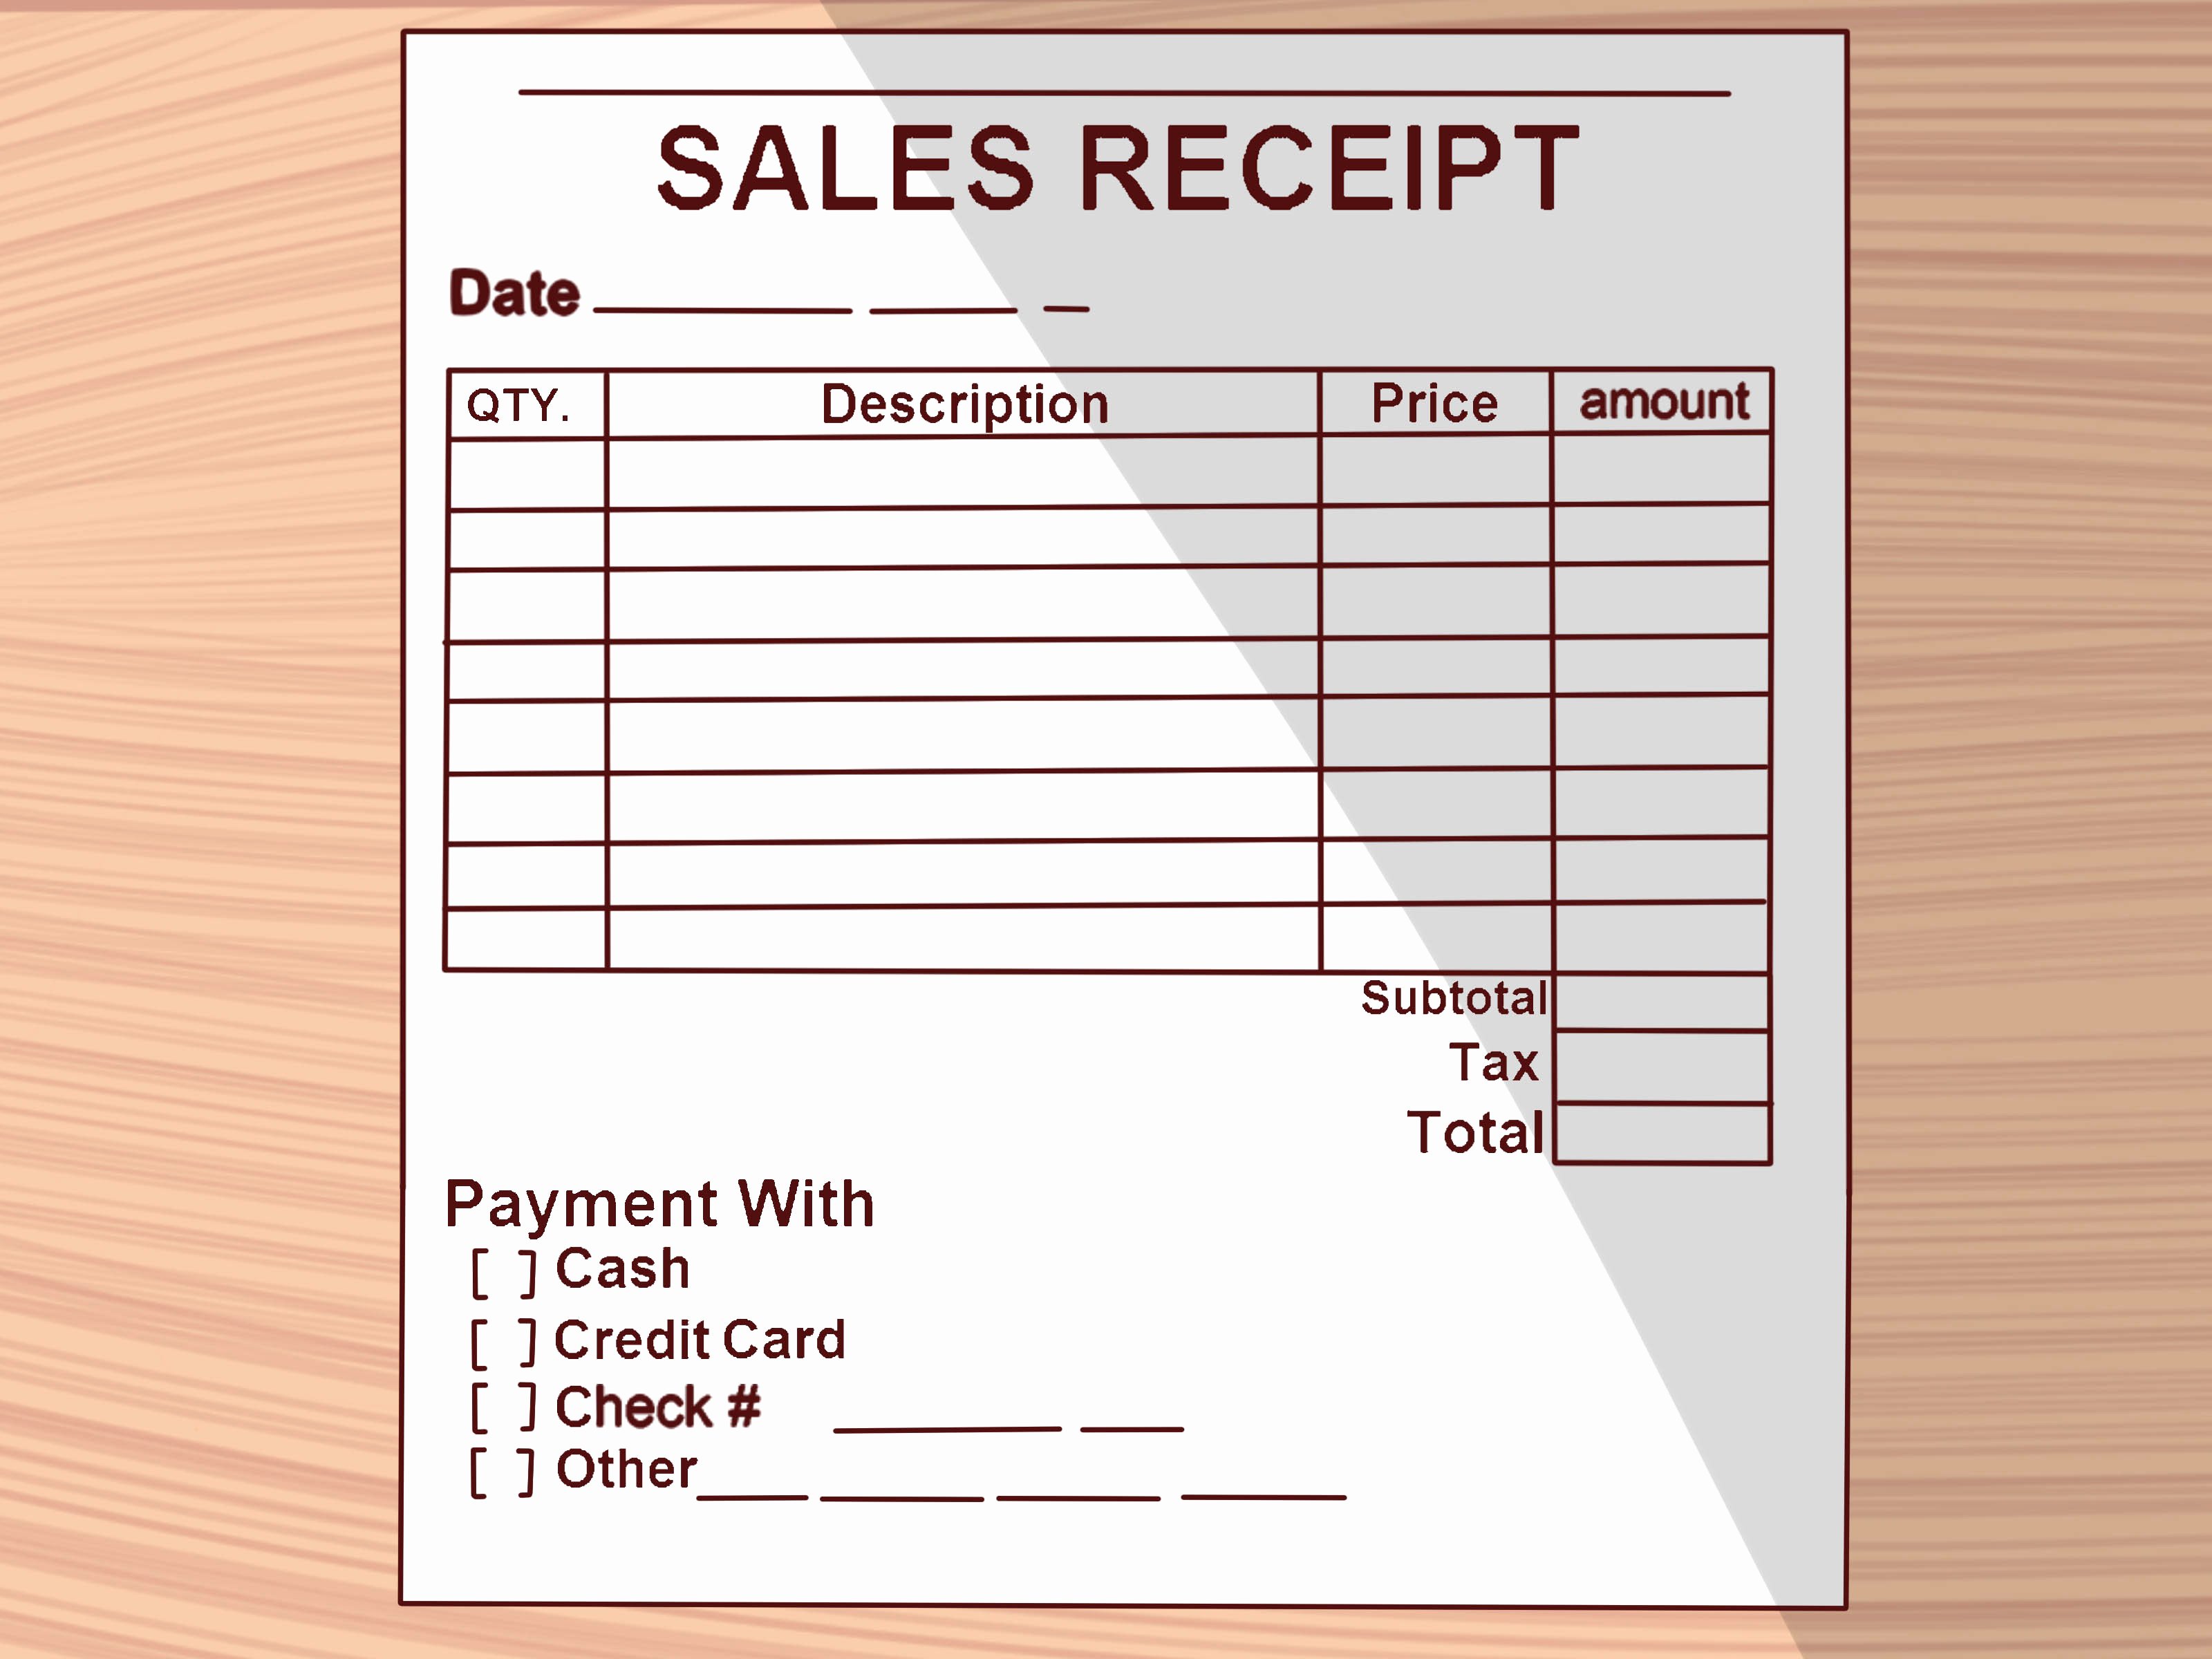 Hand Written Receipt Template Fresh How to Write A Receipt 9 Steps with Wikihow